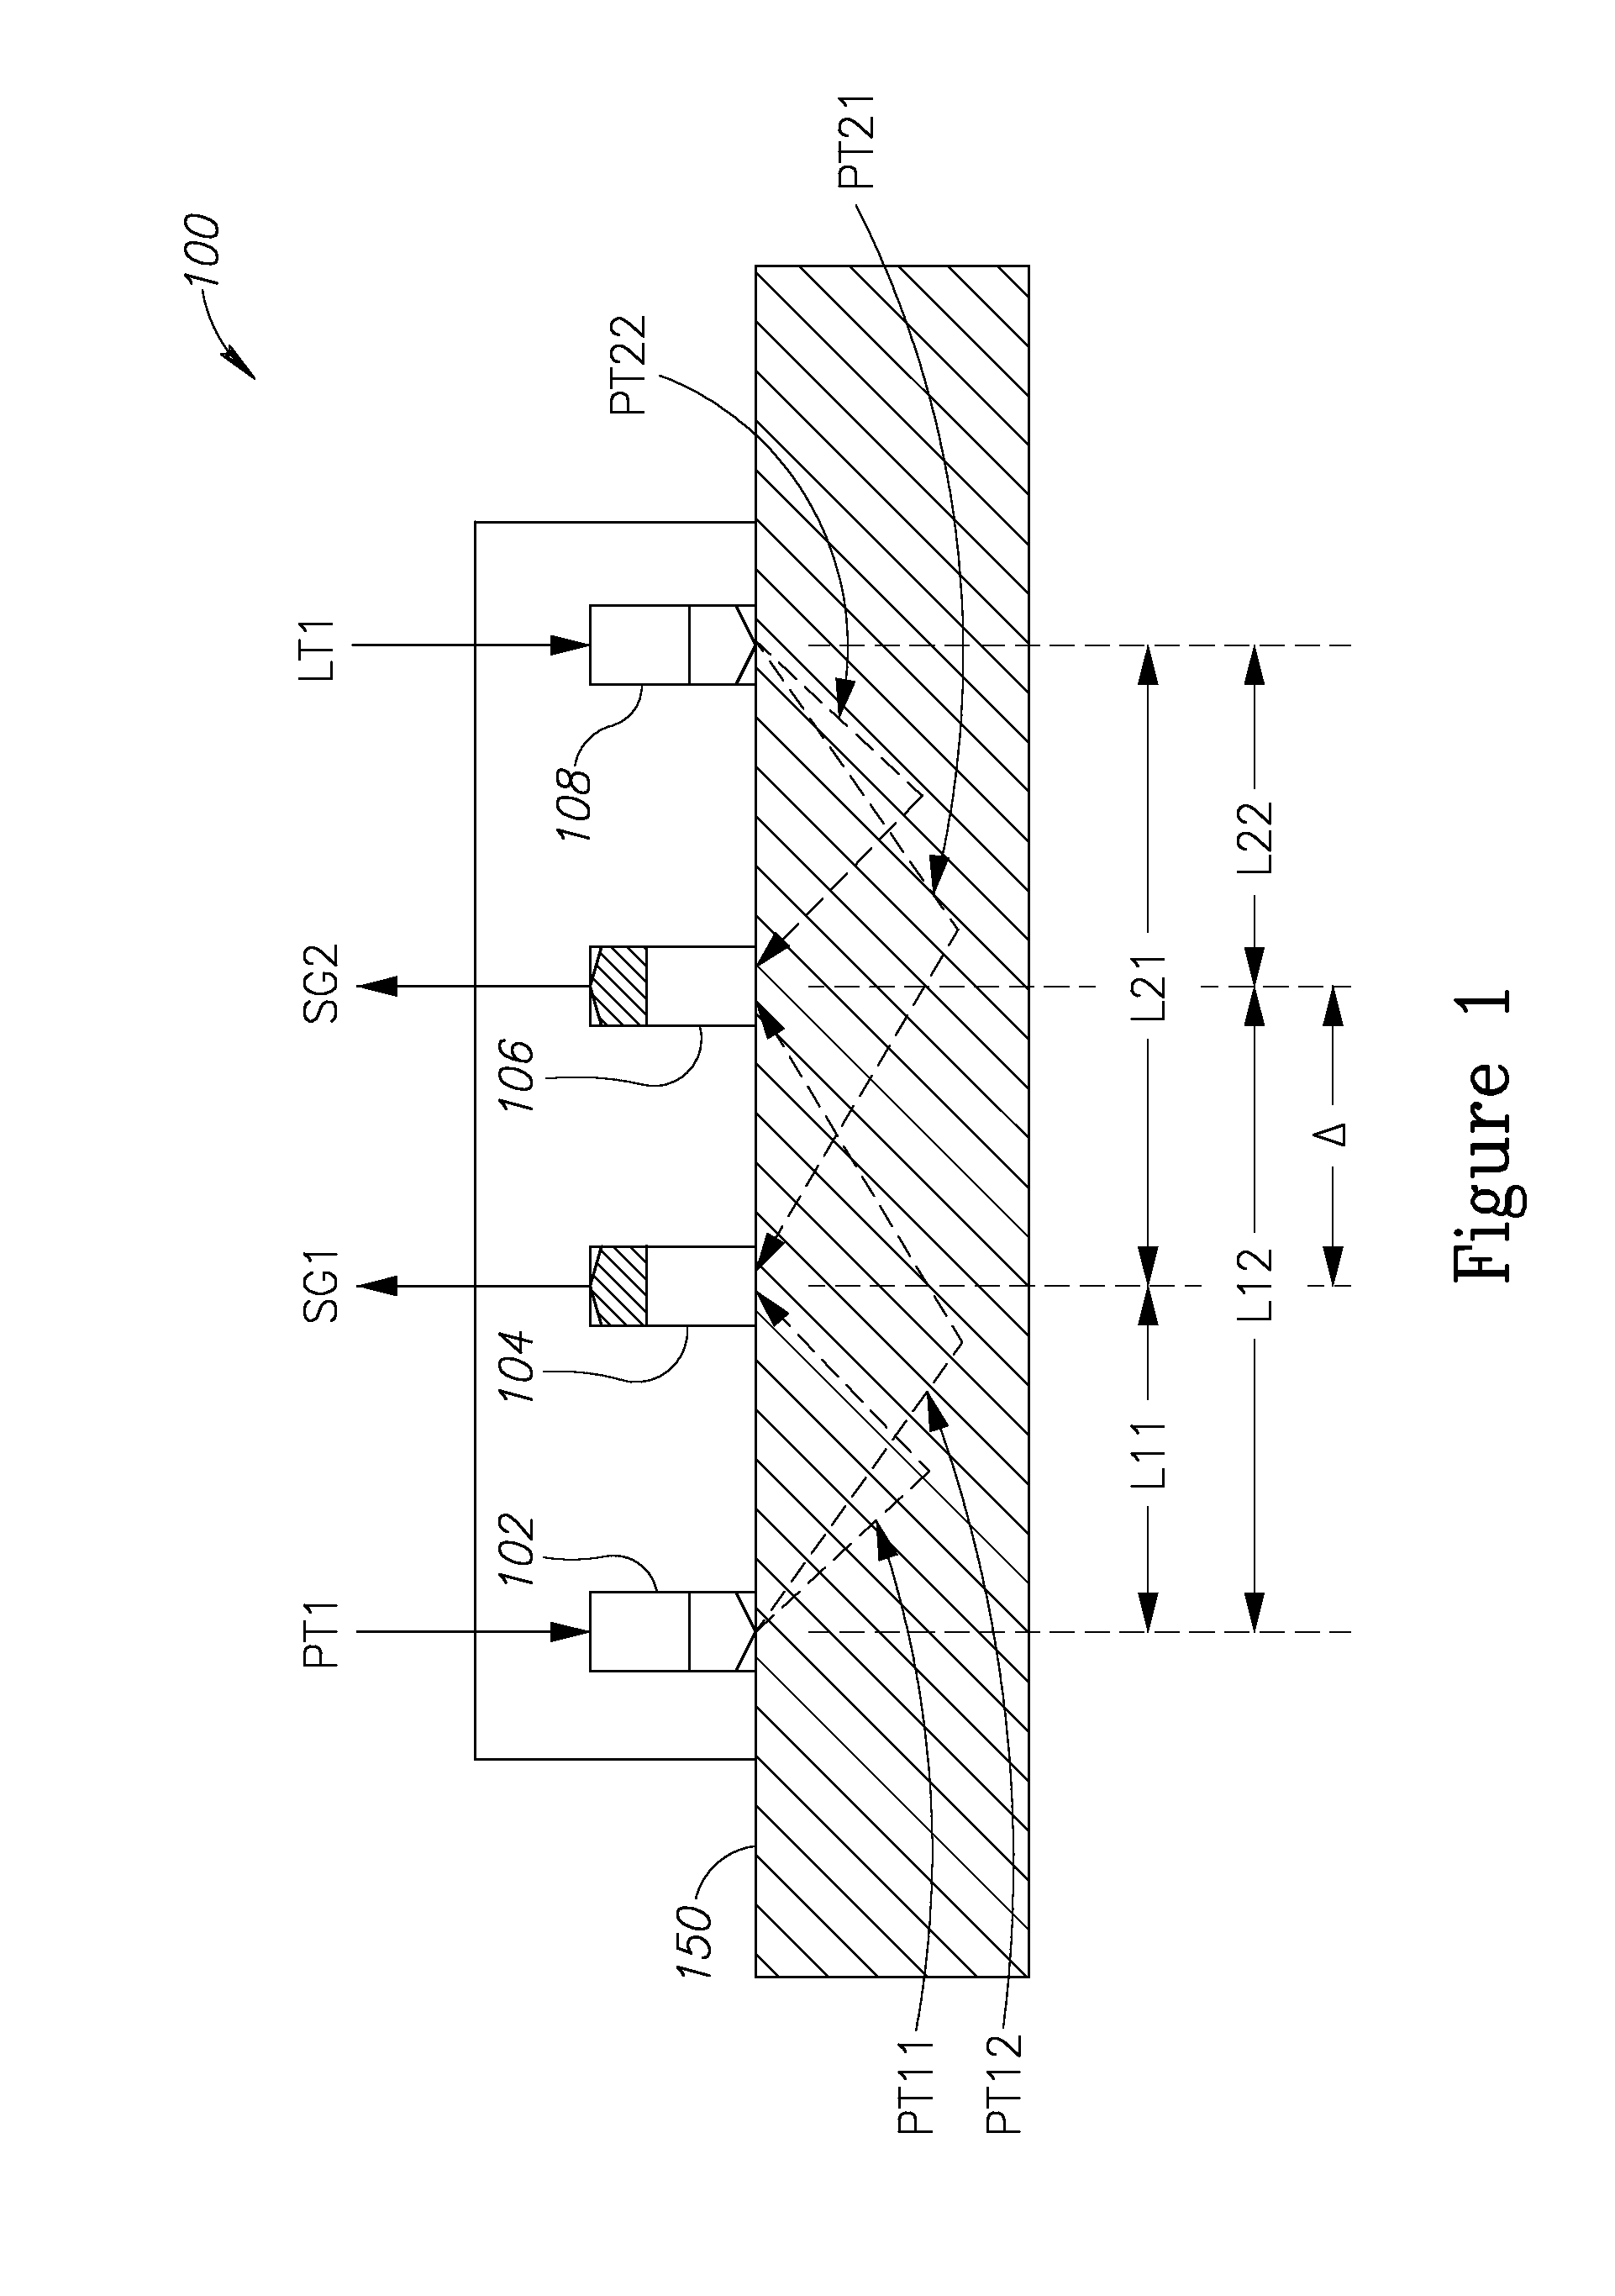 Bodily worn multiple optical sensors heart rate measuring device and method